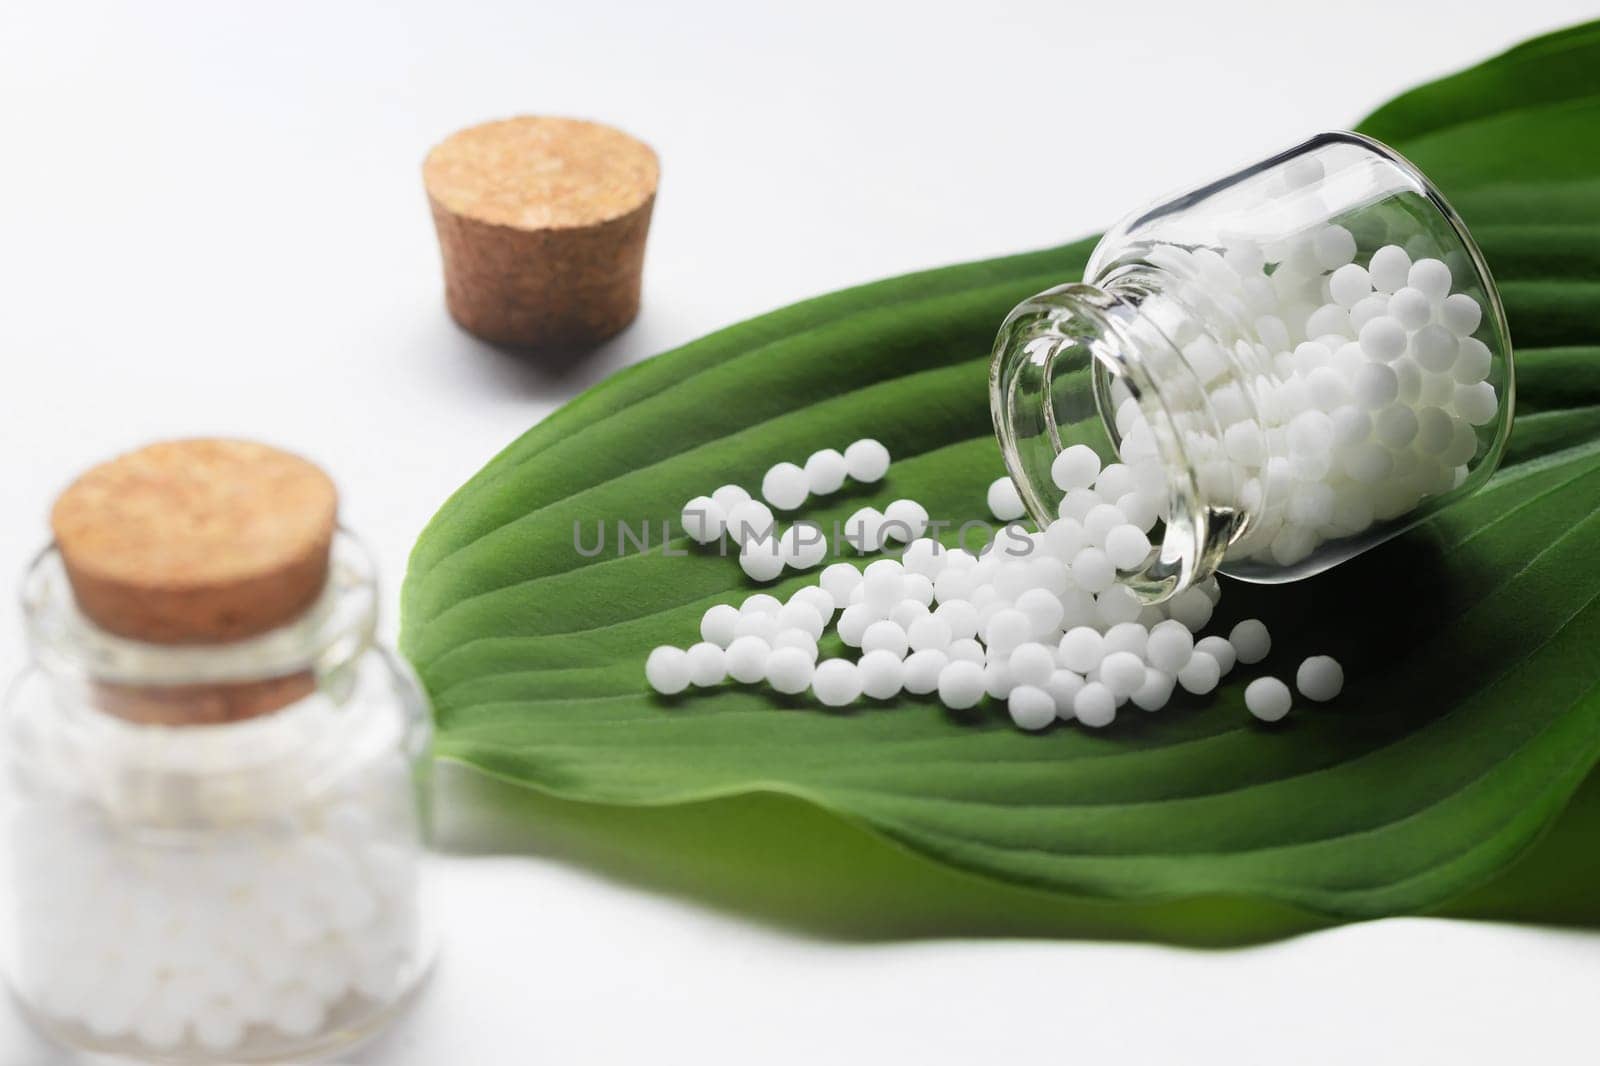 Homeopathic pills scattered from a bottle on a green leaf by galsand